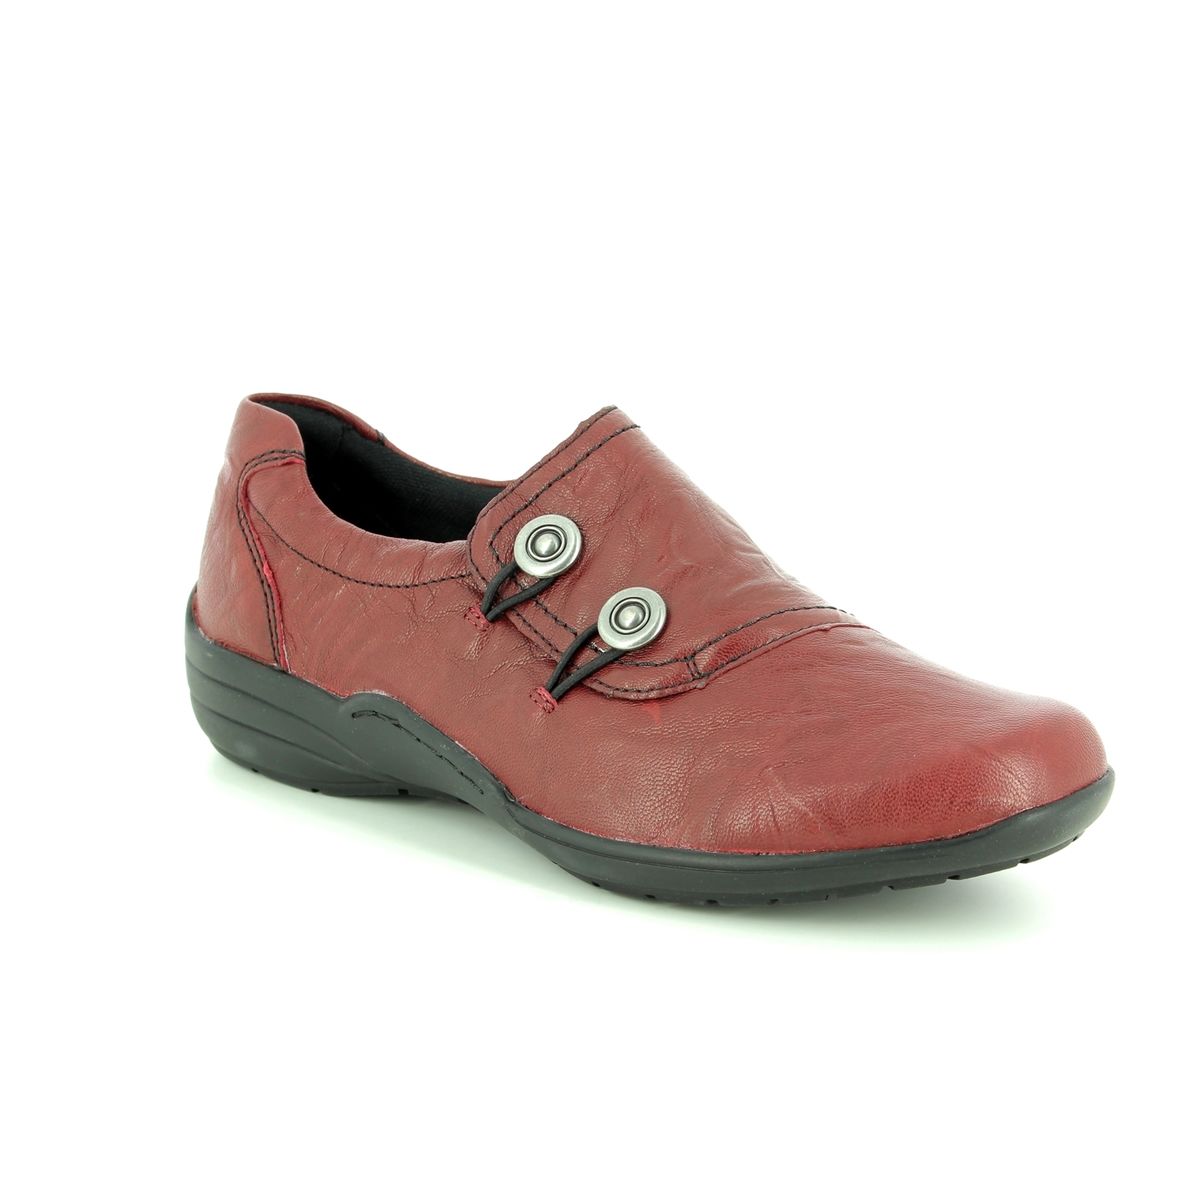 Red leather Comfort Slip On Shoes